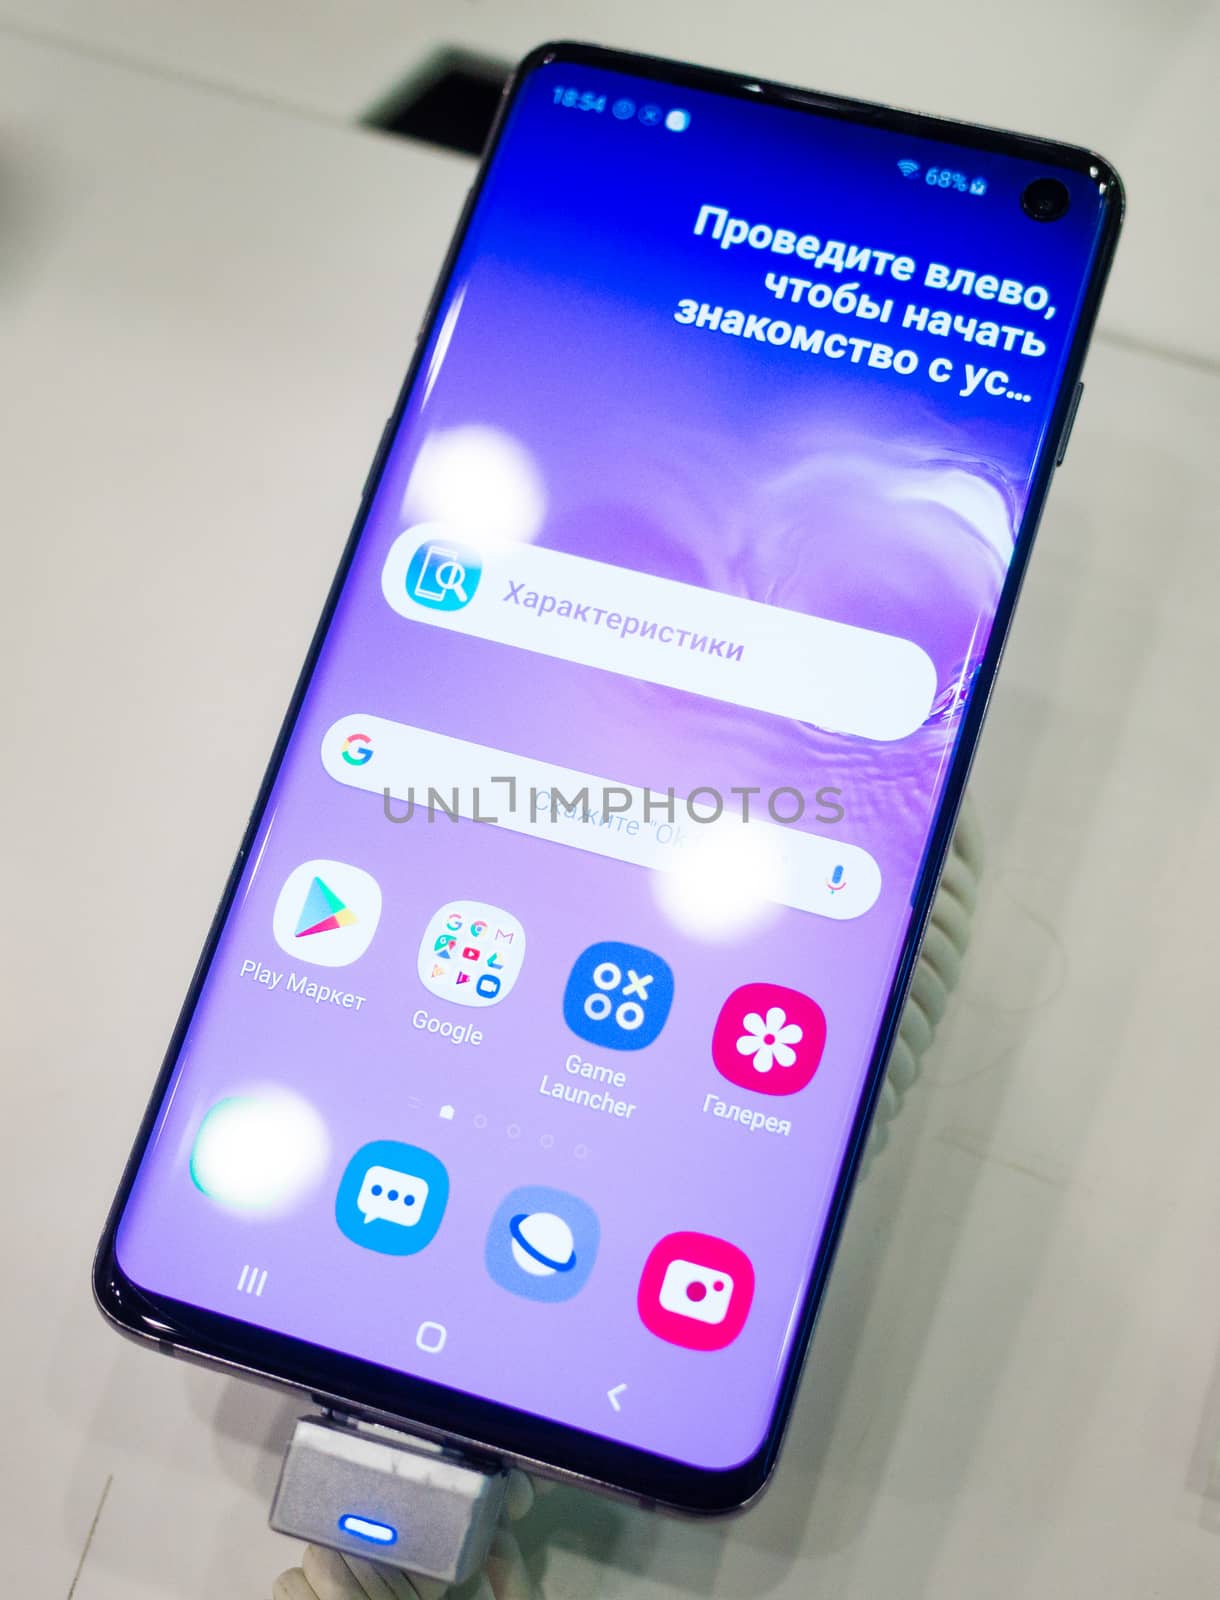 February 28, 2019 Moscow, Russia. The new smartphone from Samsung Galaxy s10 on the shelf in the gadget store.